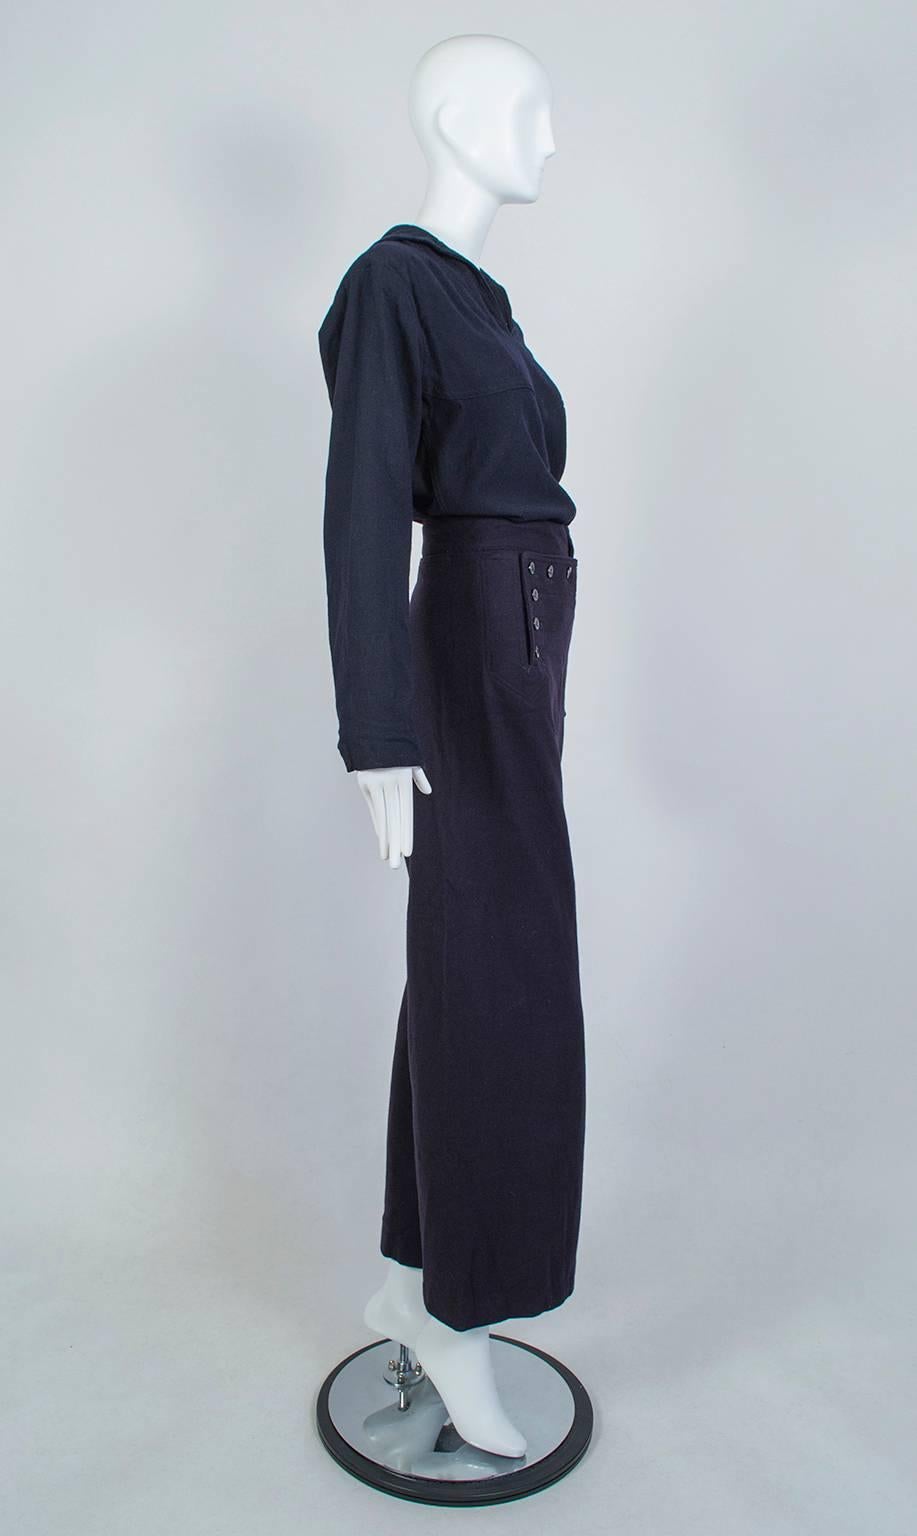 The ultimate “borrowed from the boys” ensemble, the US Navy crackerjack—with its wide-legged pants and pullover jumper—ironically seems better suited to a woman’s curves than the male body. This one has the added benefit of having belonged to a Navy